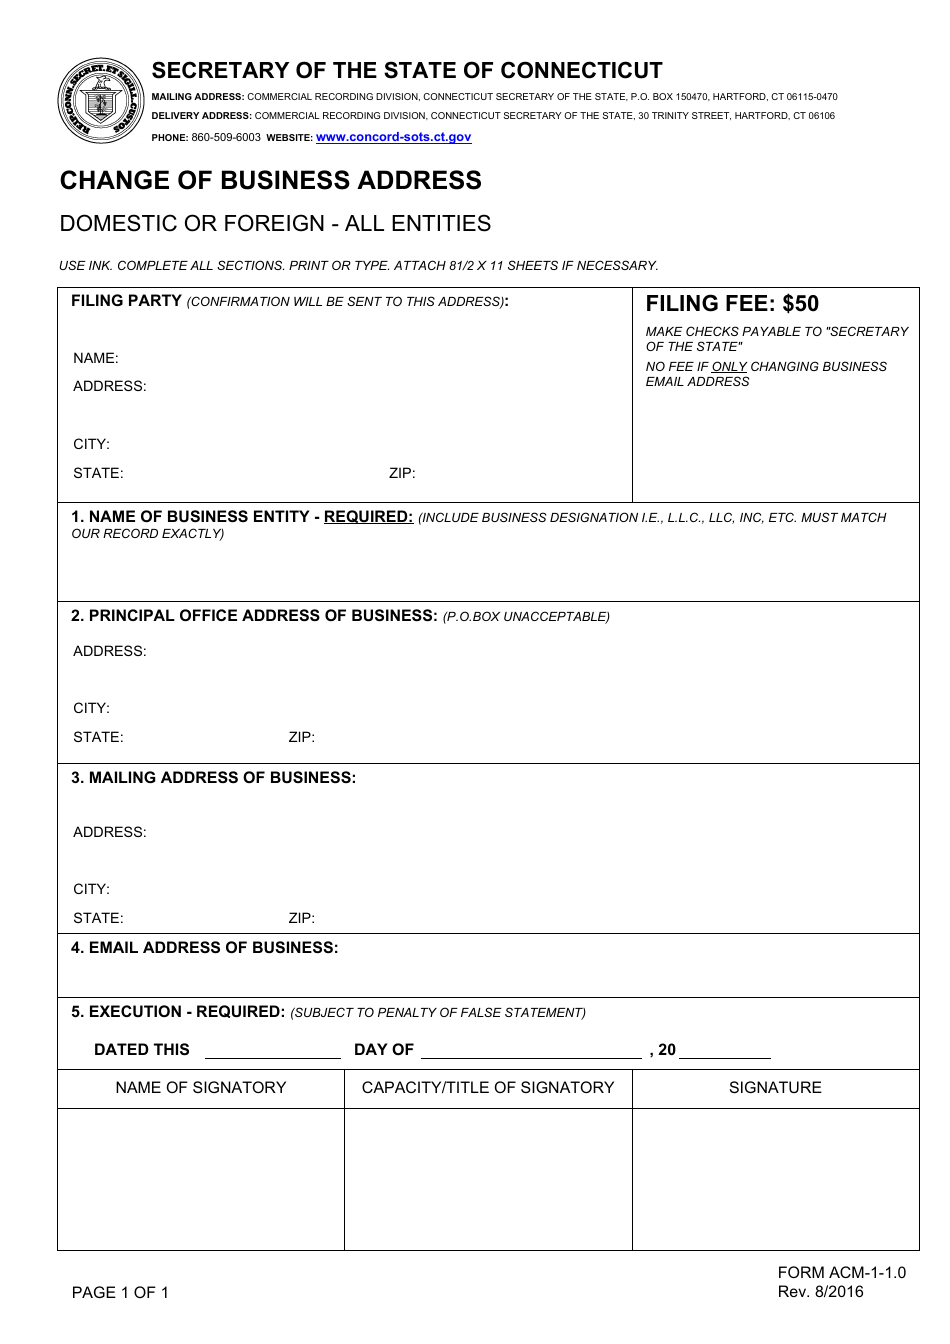 Form ACM-1-1.0 Change of Business Address - Domestic or Foreign - All Entities - Connecticut, Page 1